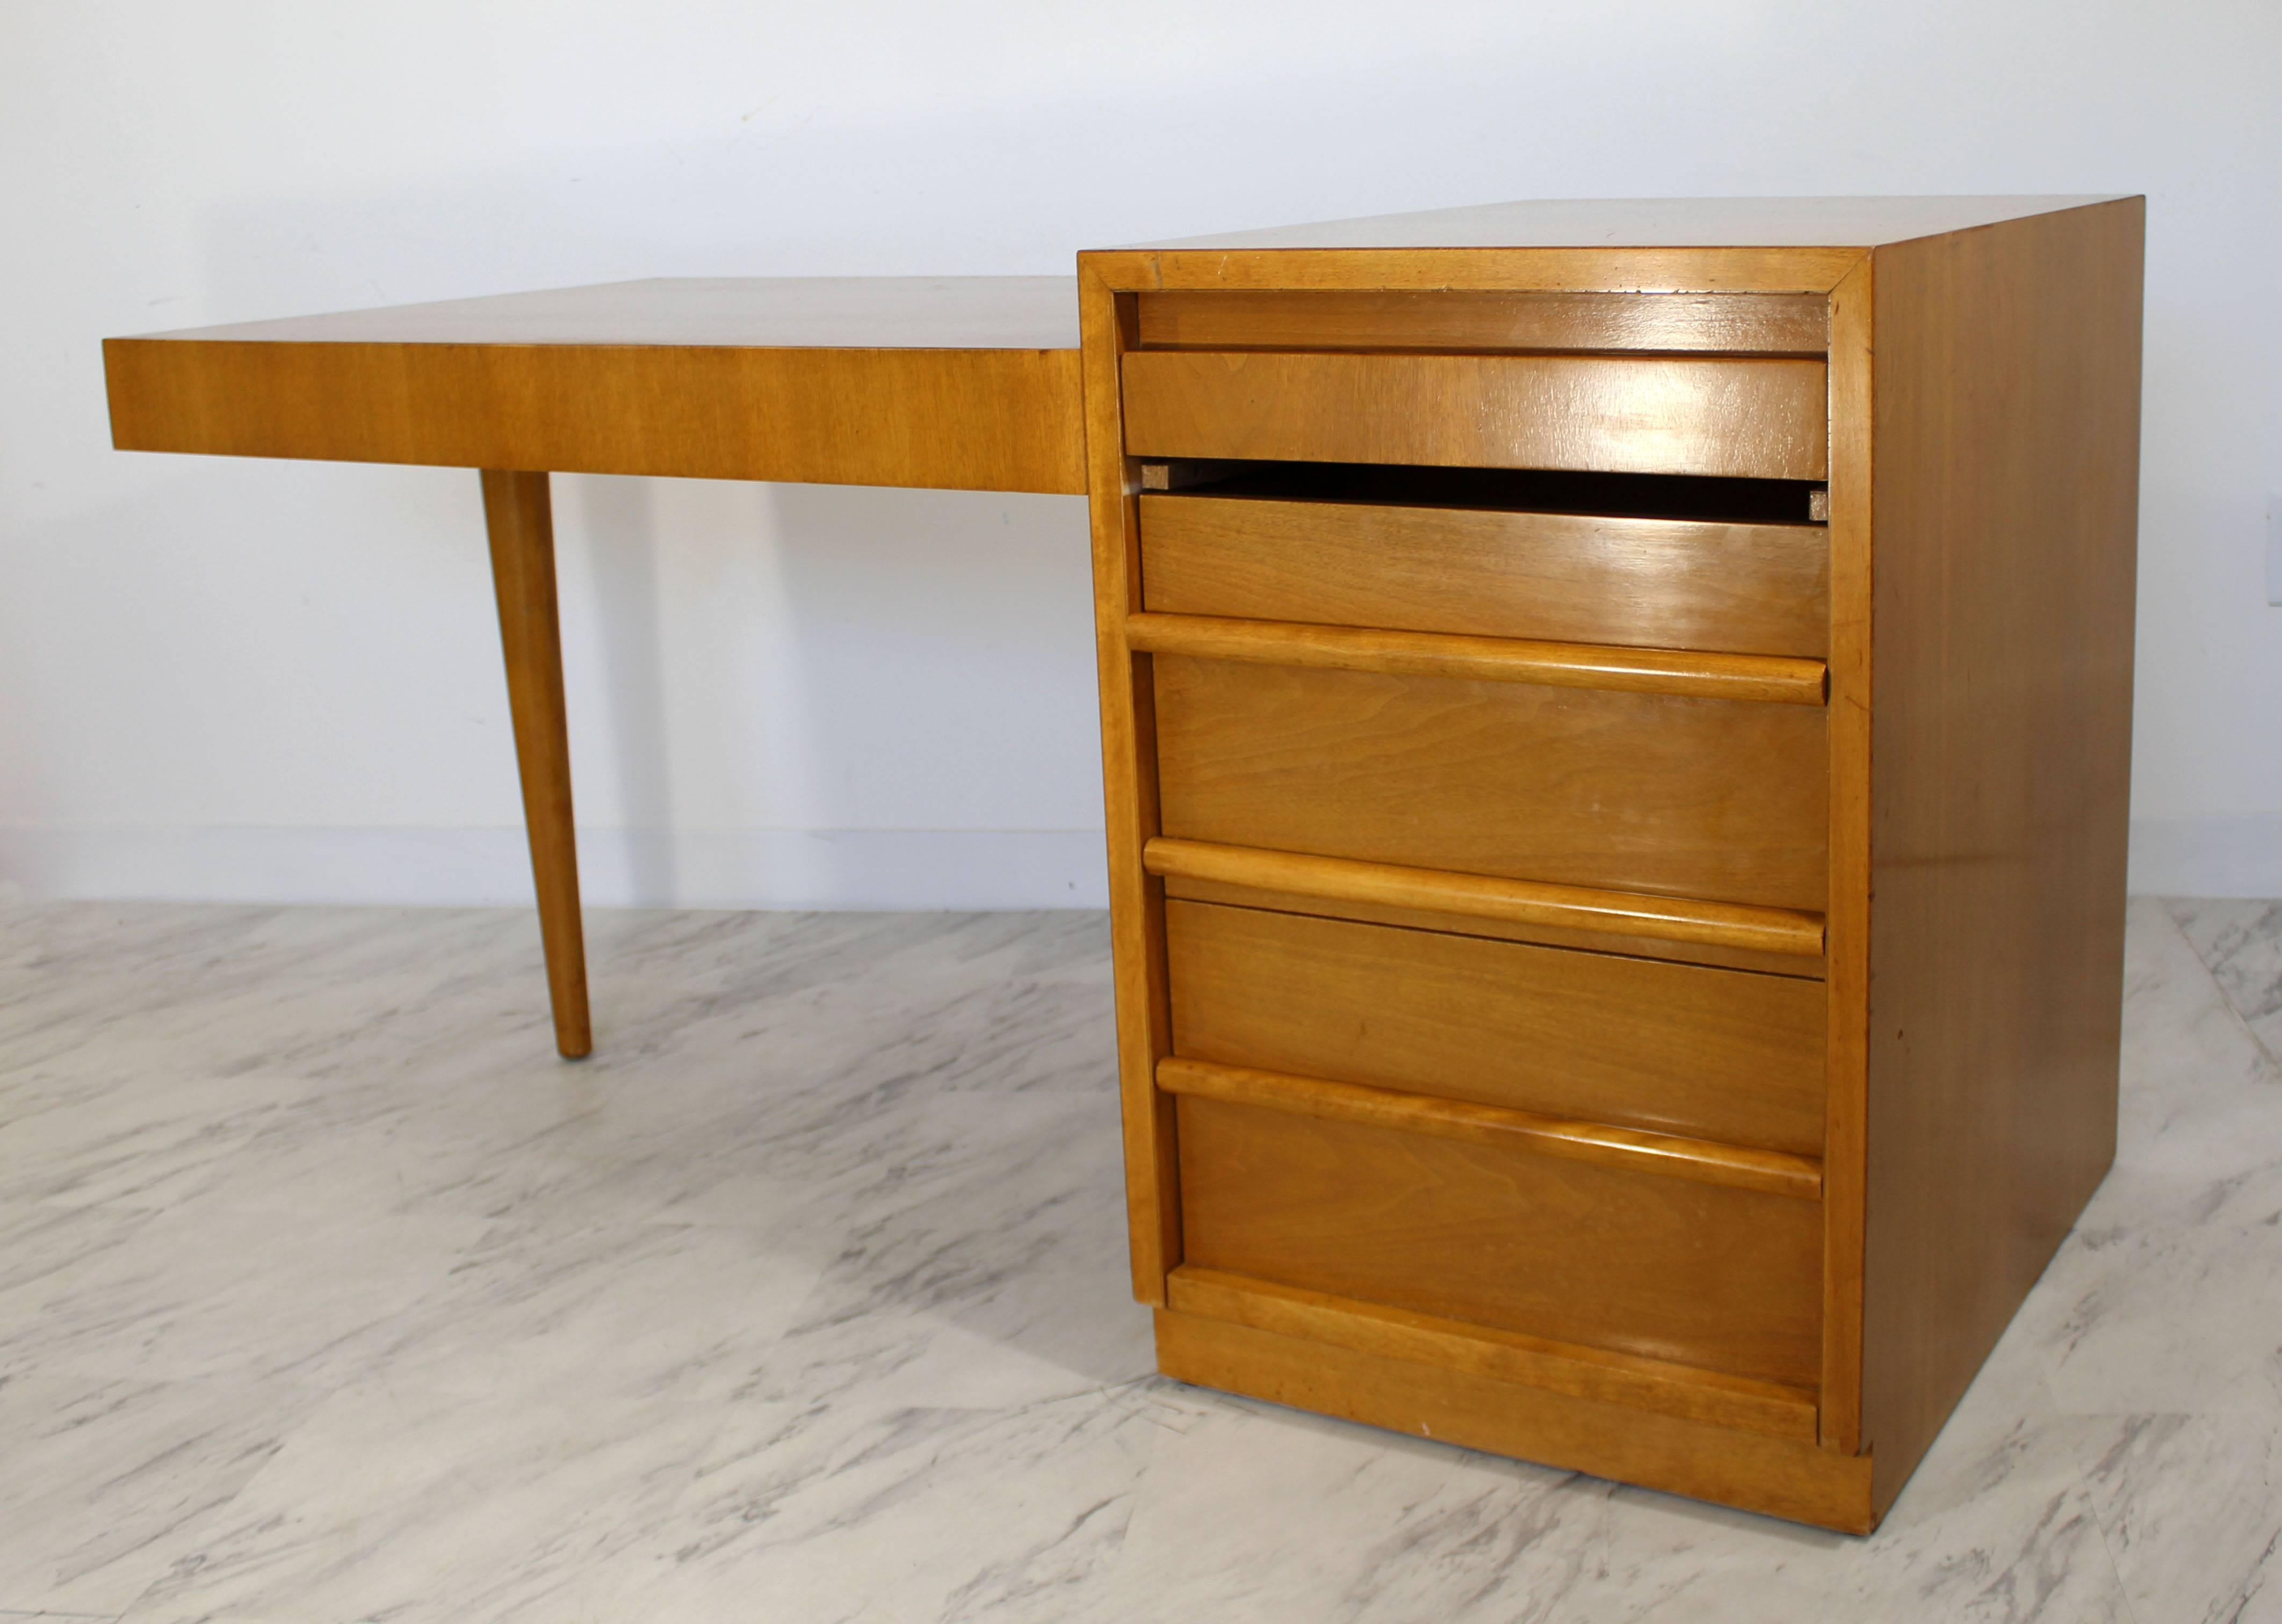 For your consideration is a rare sturdy and stunning, Cantilever walnut desk, with four, utilitarian compartment drawers. This unique legged desk was designed by T.H. Robsjohn-Gibbings for Widdicomb in the 1950s. The dimensions are 60" (5') W x